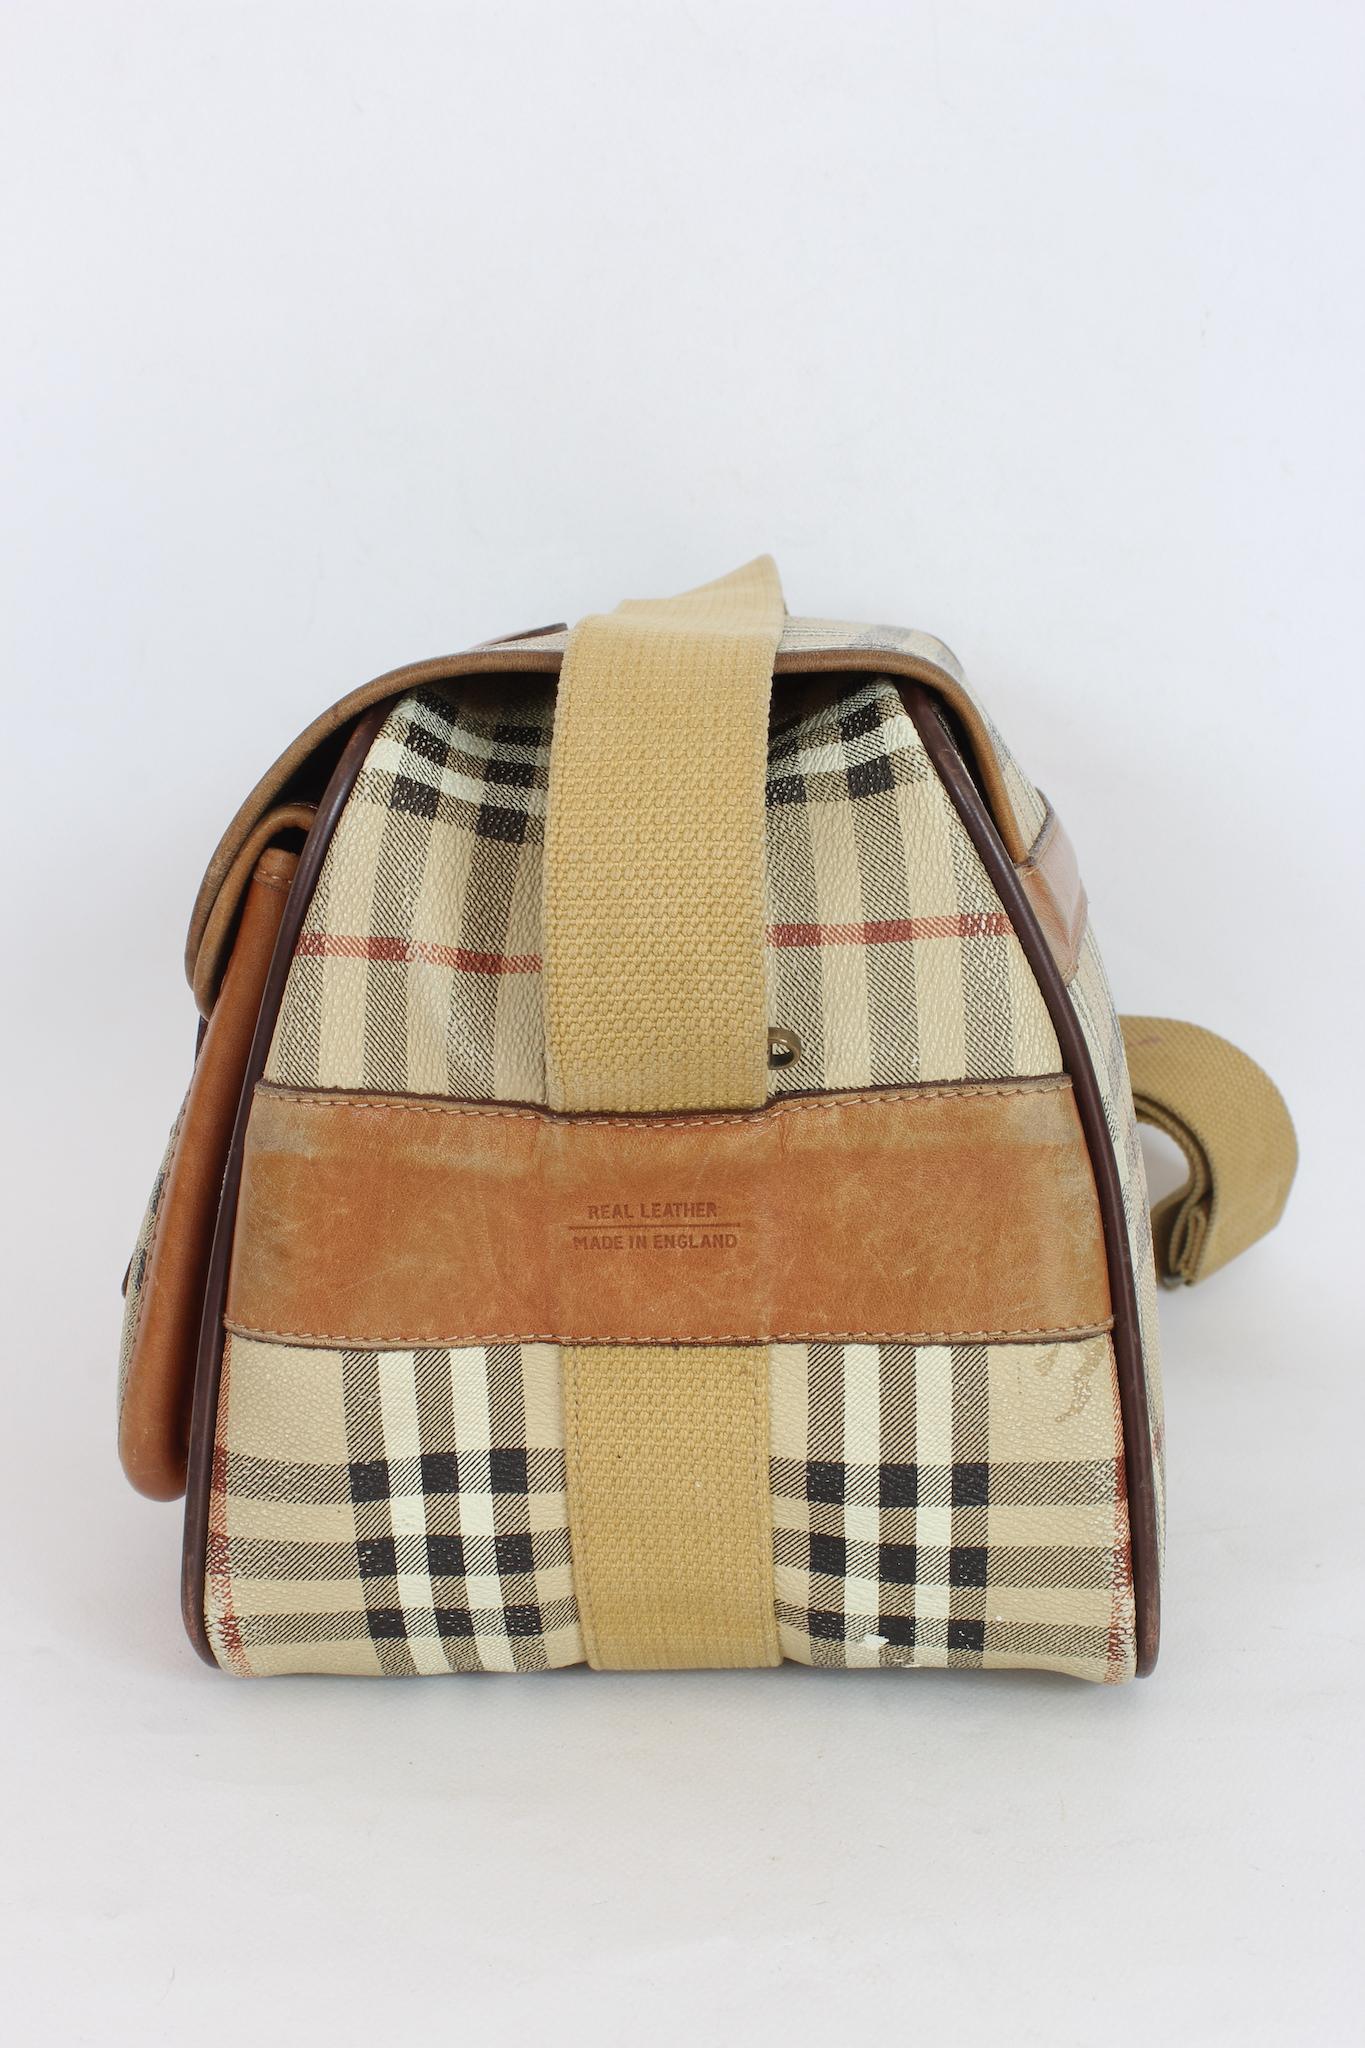 Burberry Vintage 80s Beige Leather Check Trunk Bag 2